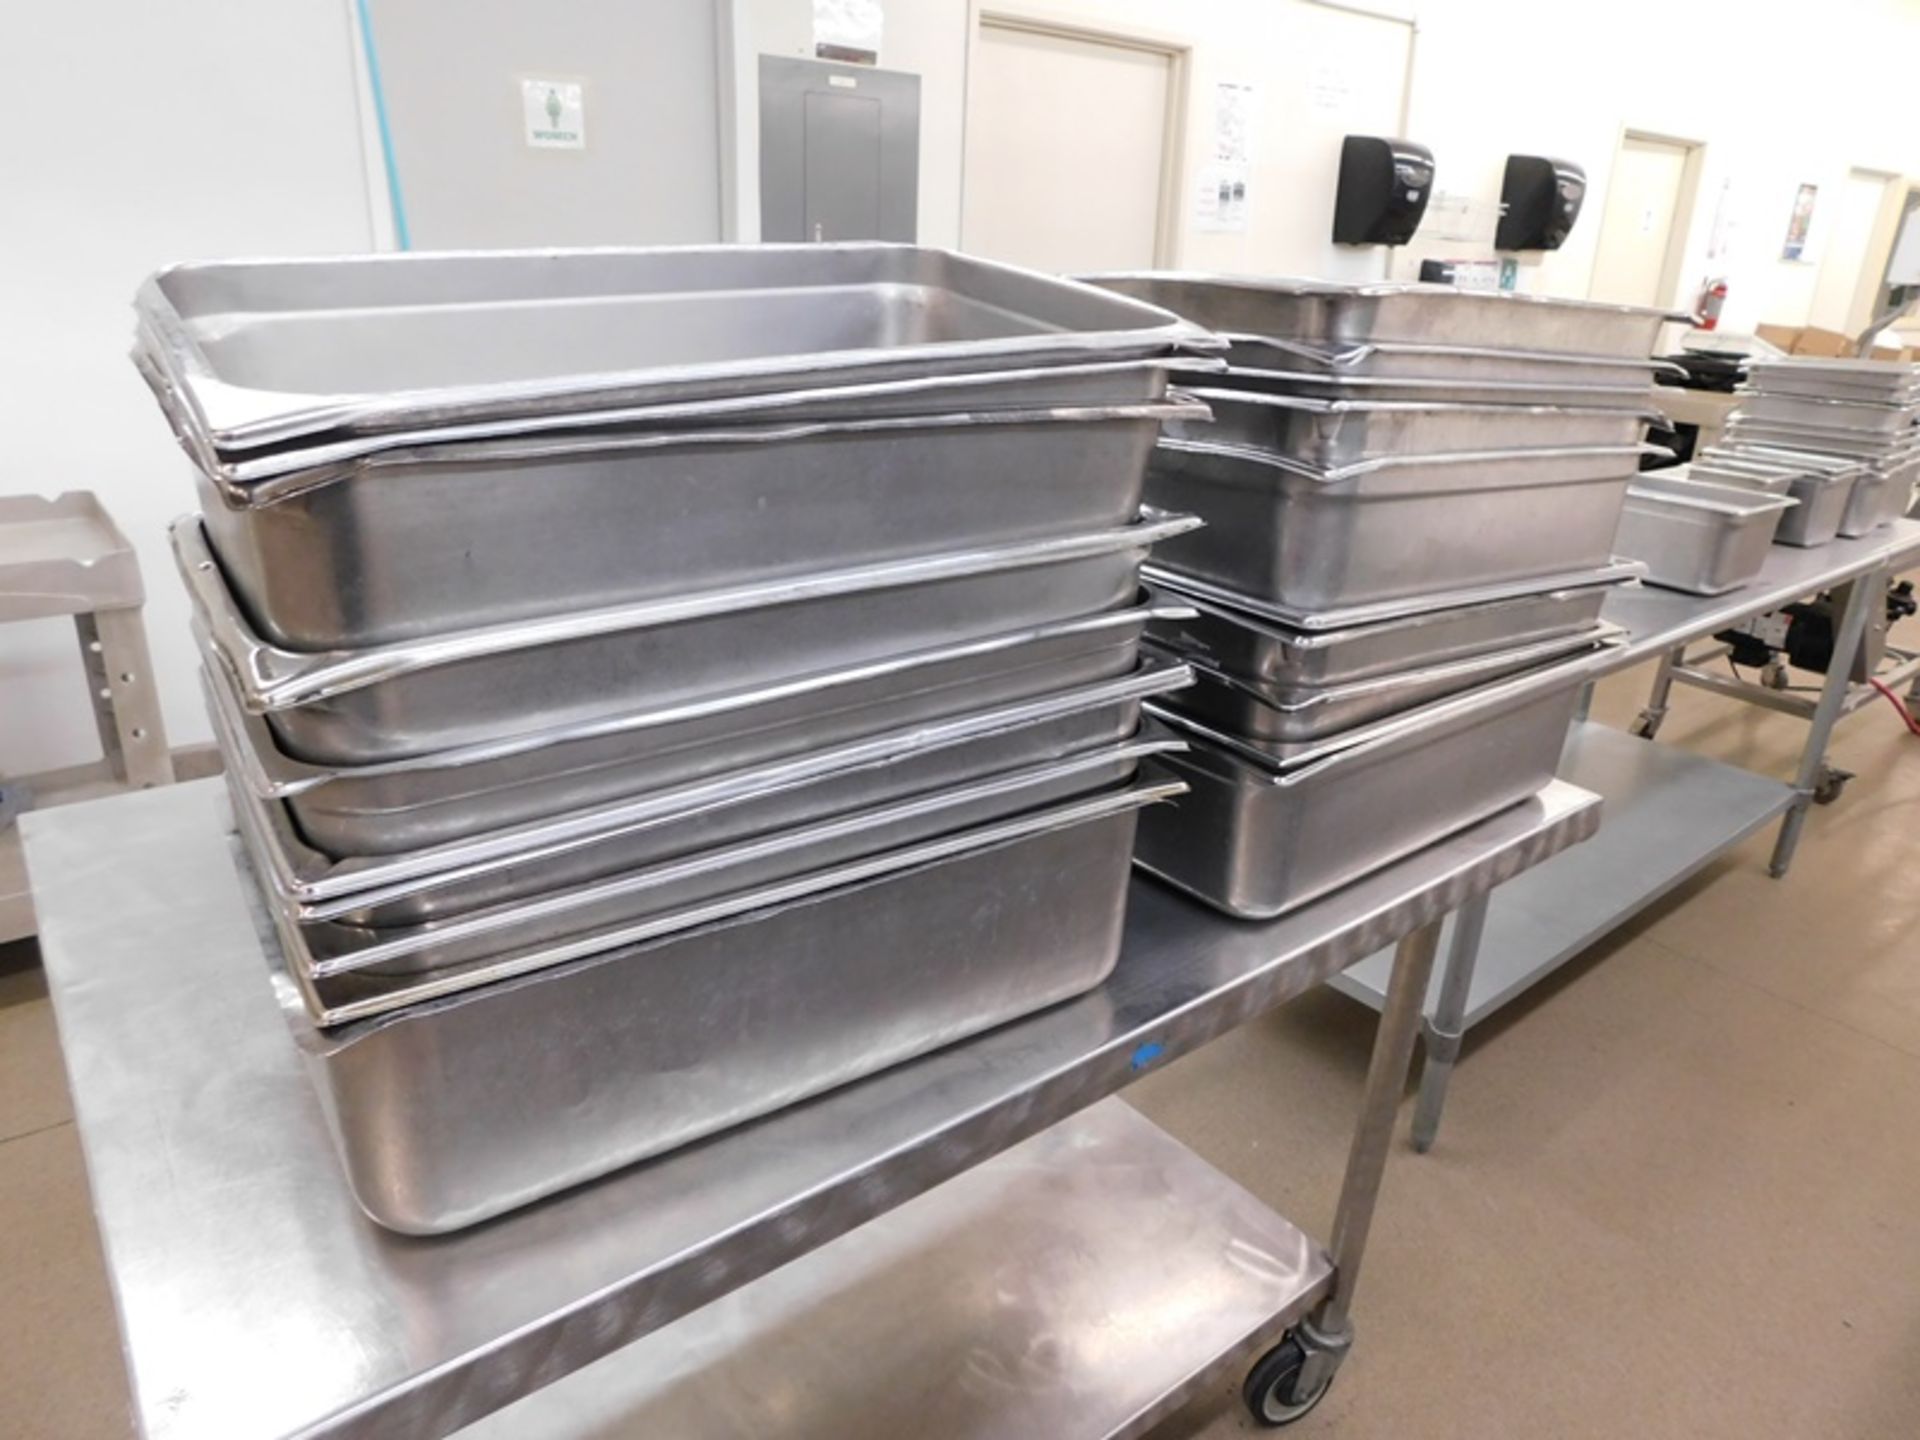 Lot of (35) Stainless Steel Pans, 20" X 14" X 4" - (Loading Fee: $50.00 Nebraska Stainless- Norm - Image 2 of 2